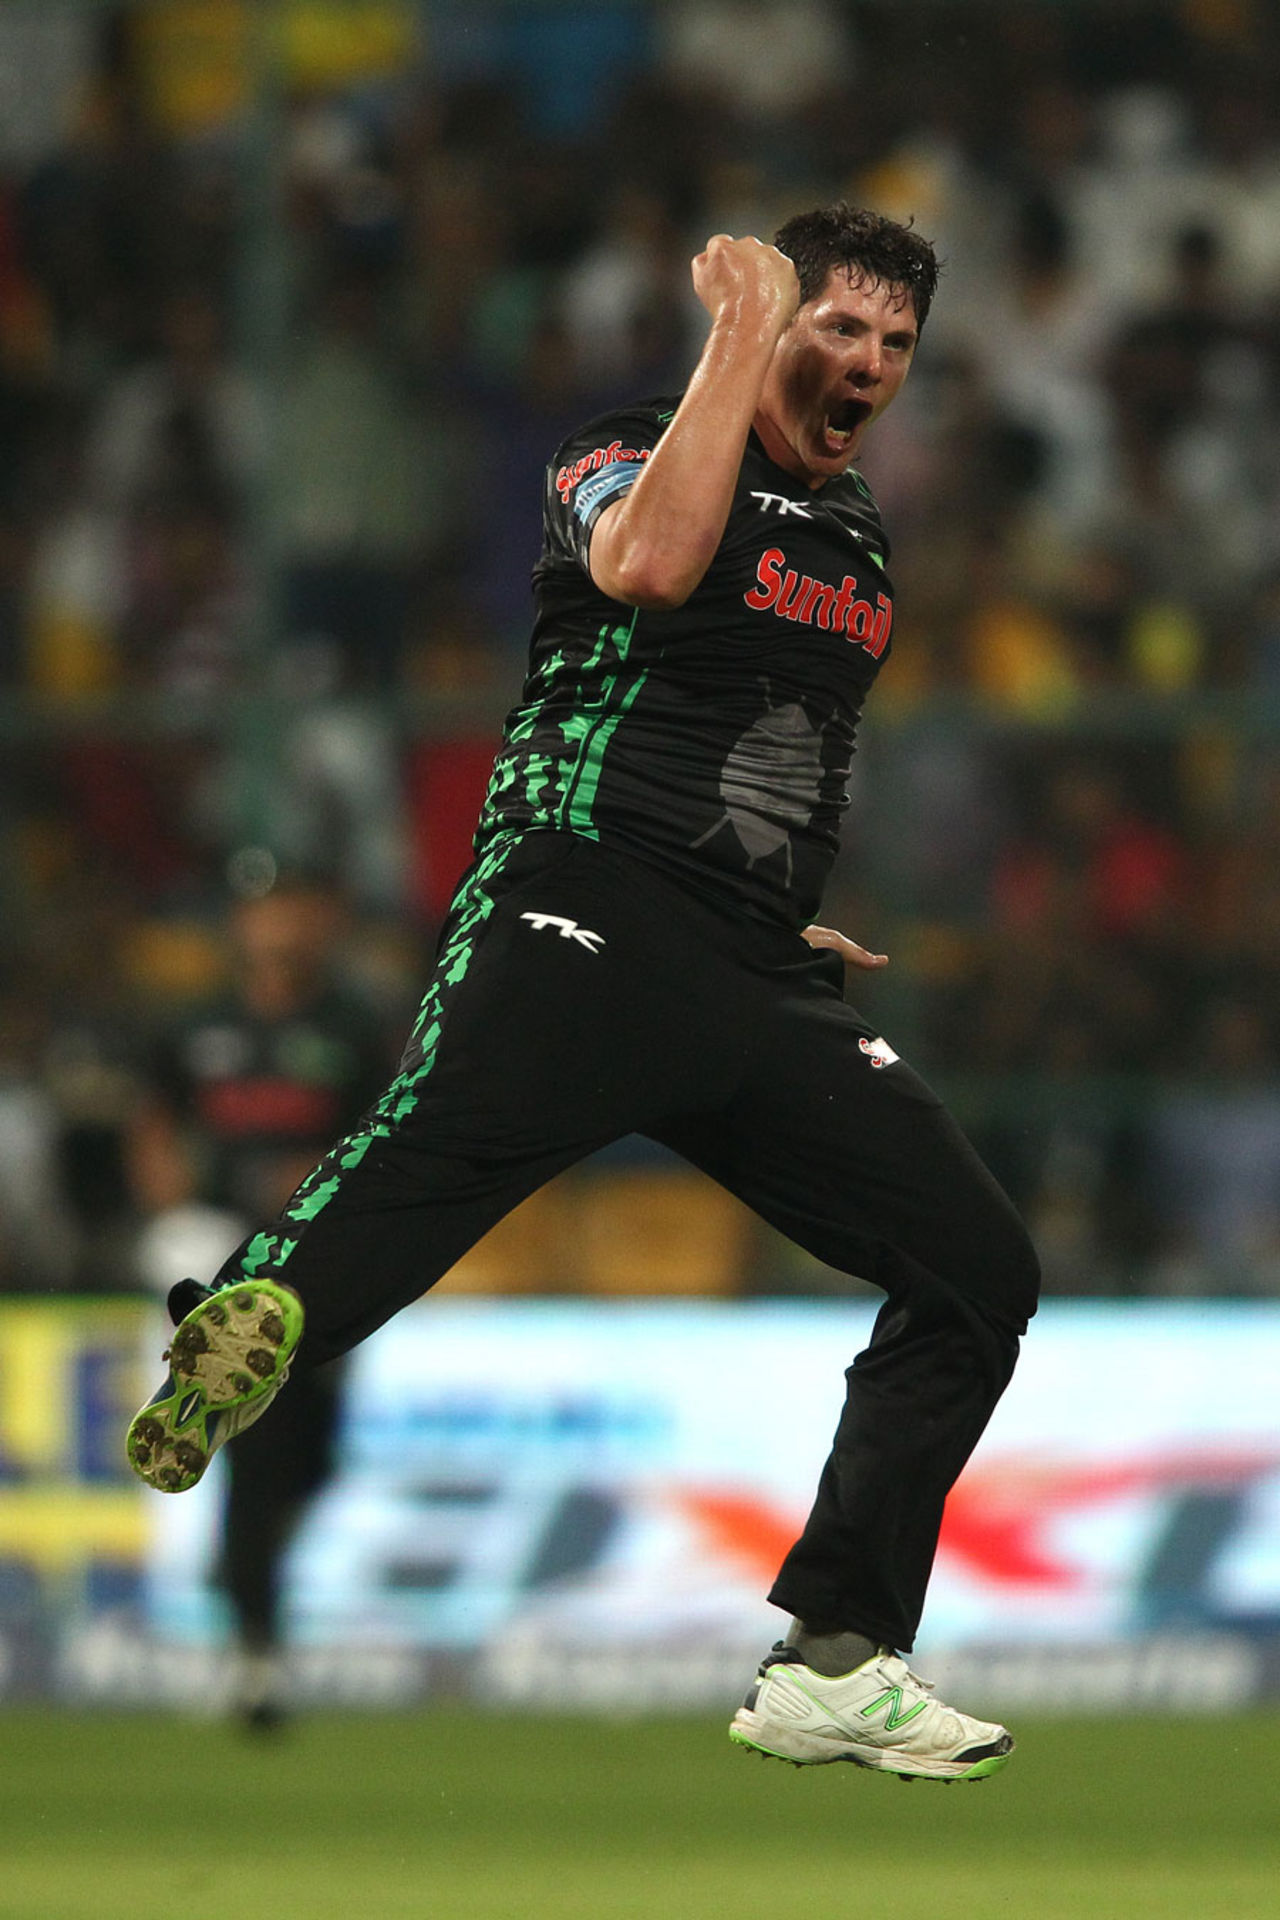 Robbie Frylinck struck twice in an over, Chennai Super Kings v Dolphins, CLT20, Group A, Bangalore, September 22, 2014